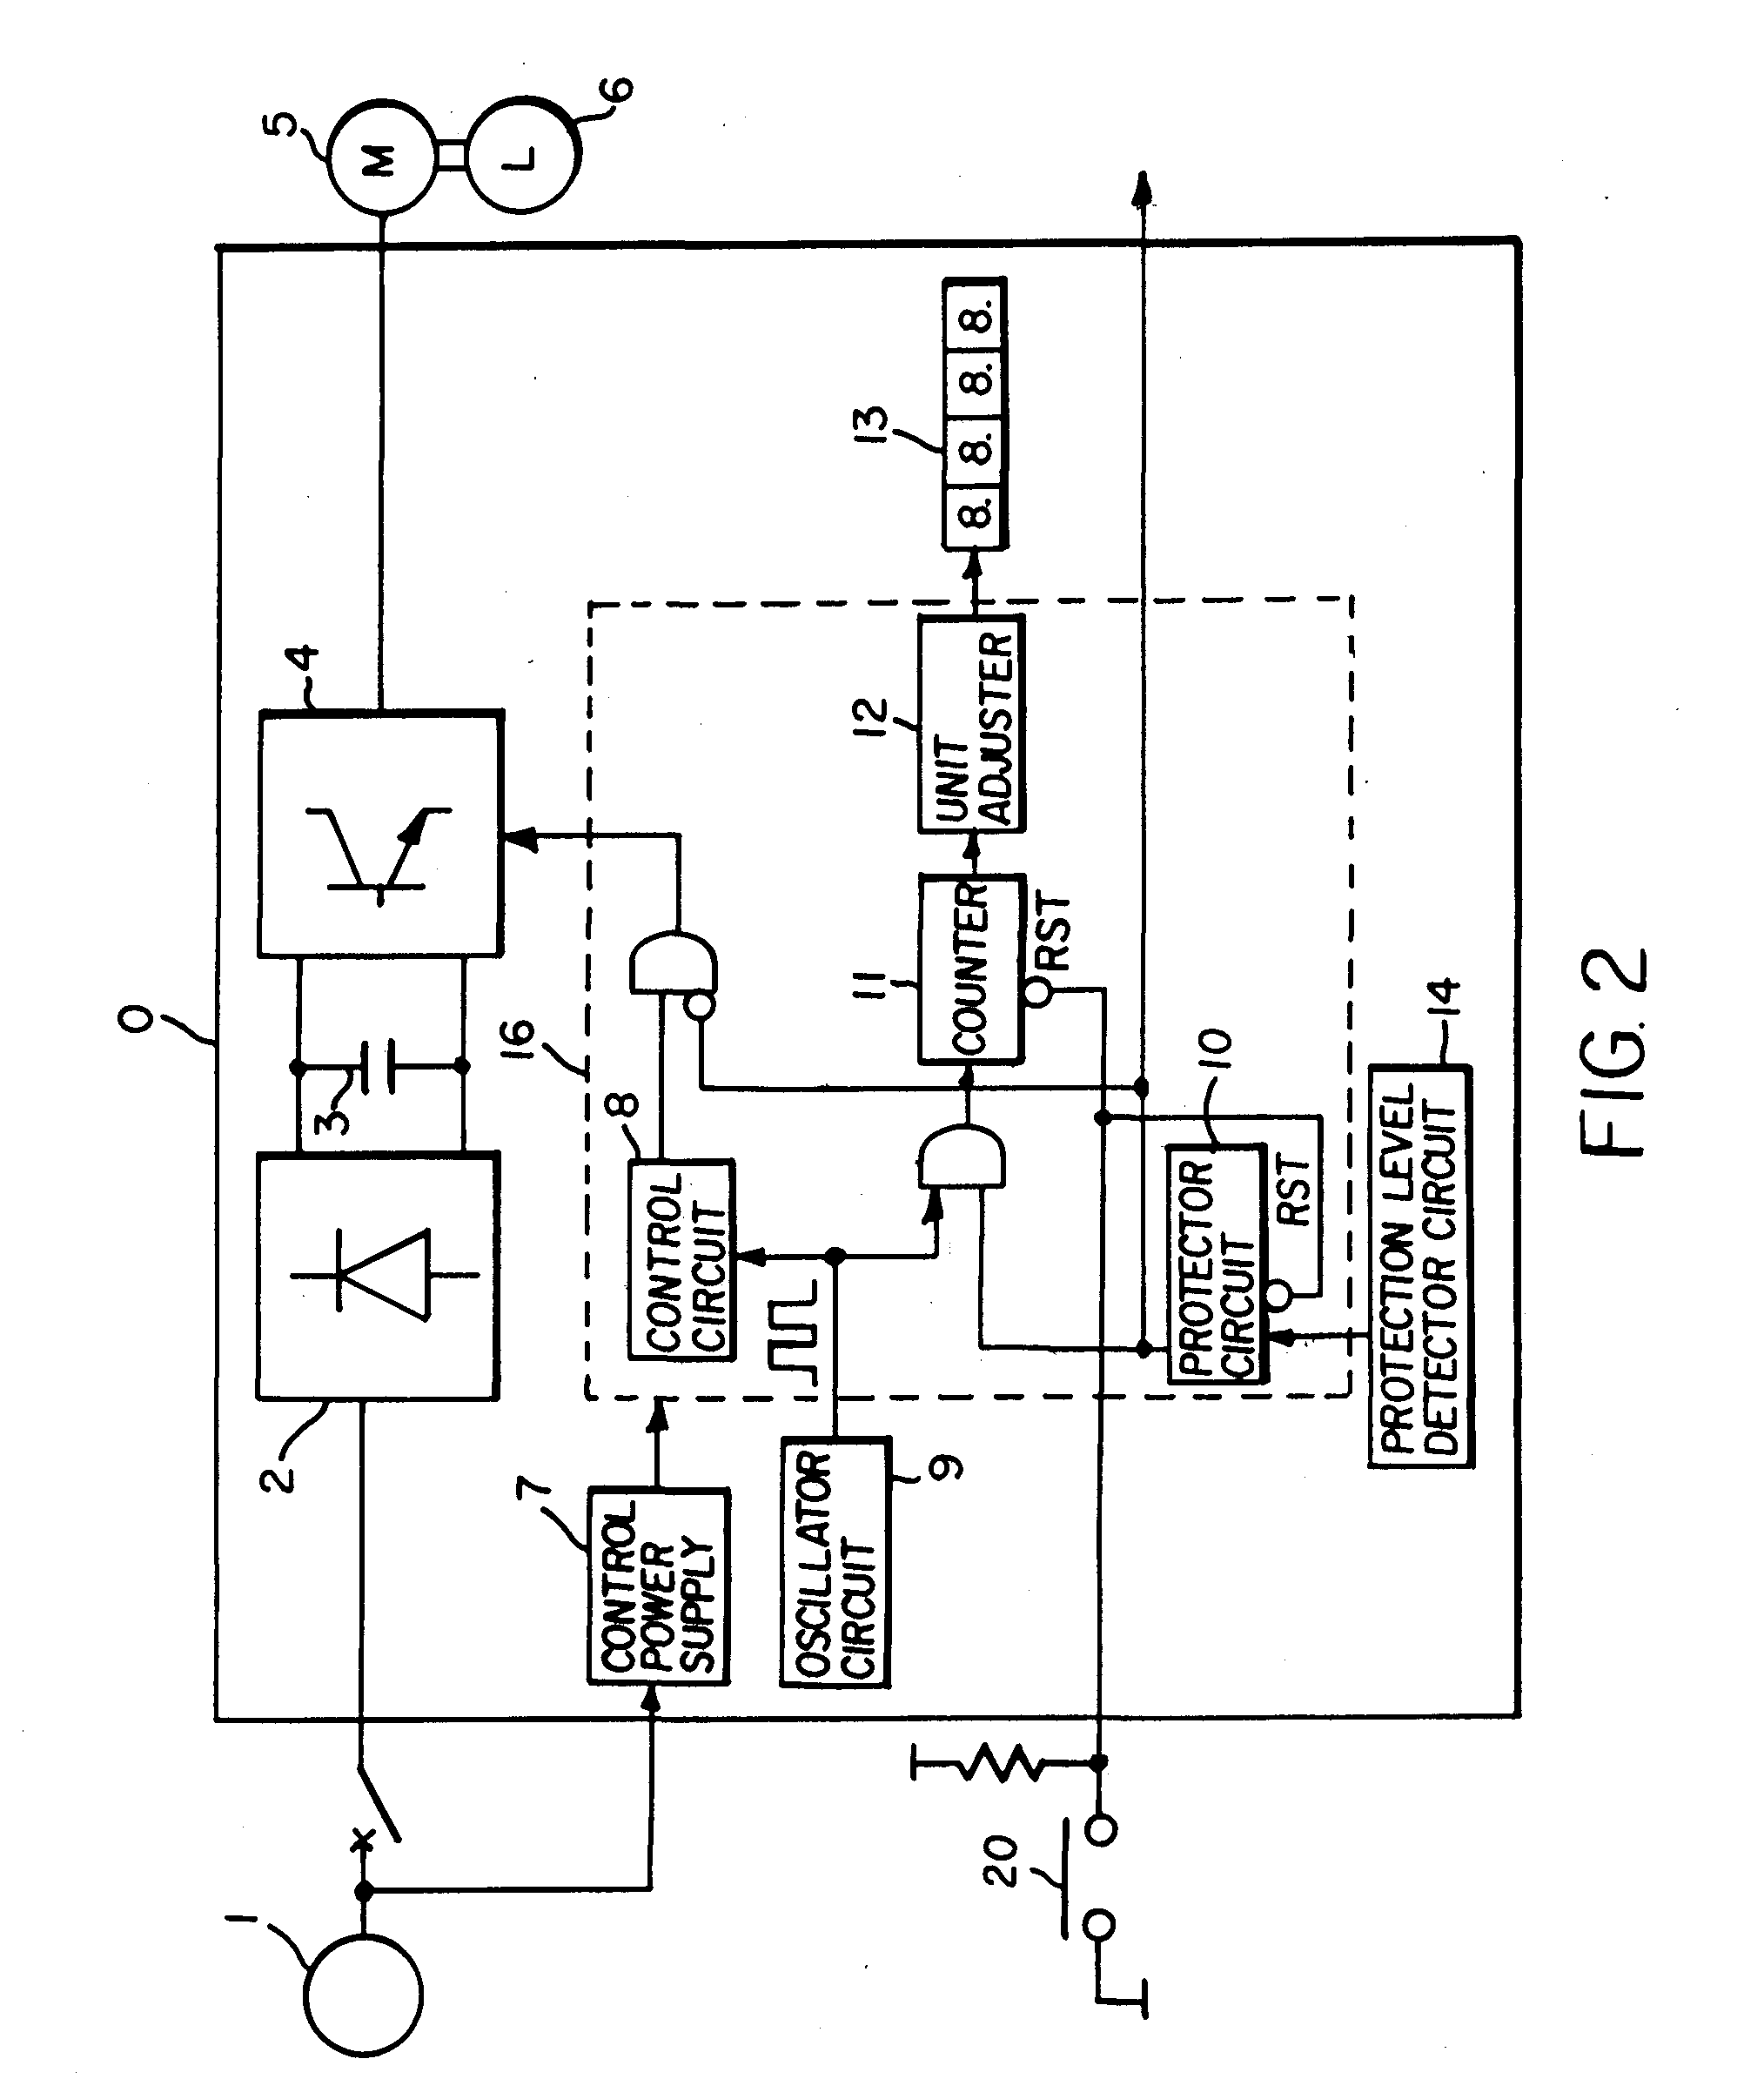 Inverter with time counting function